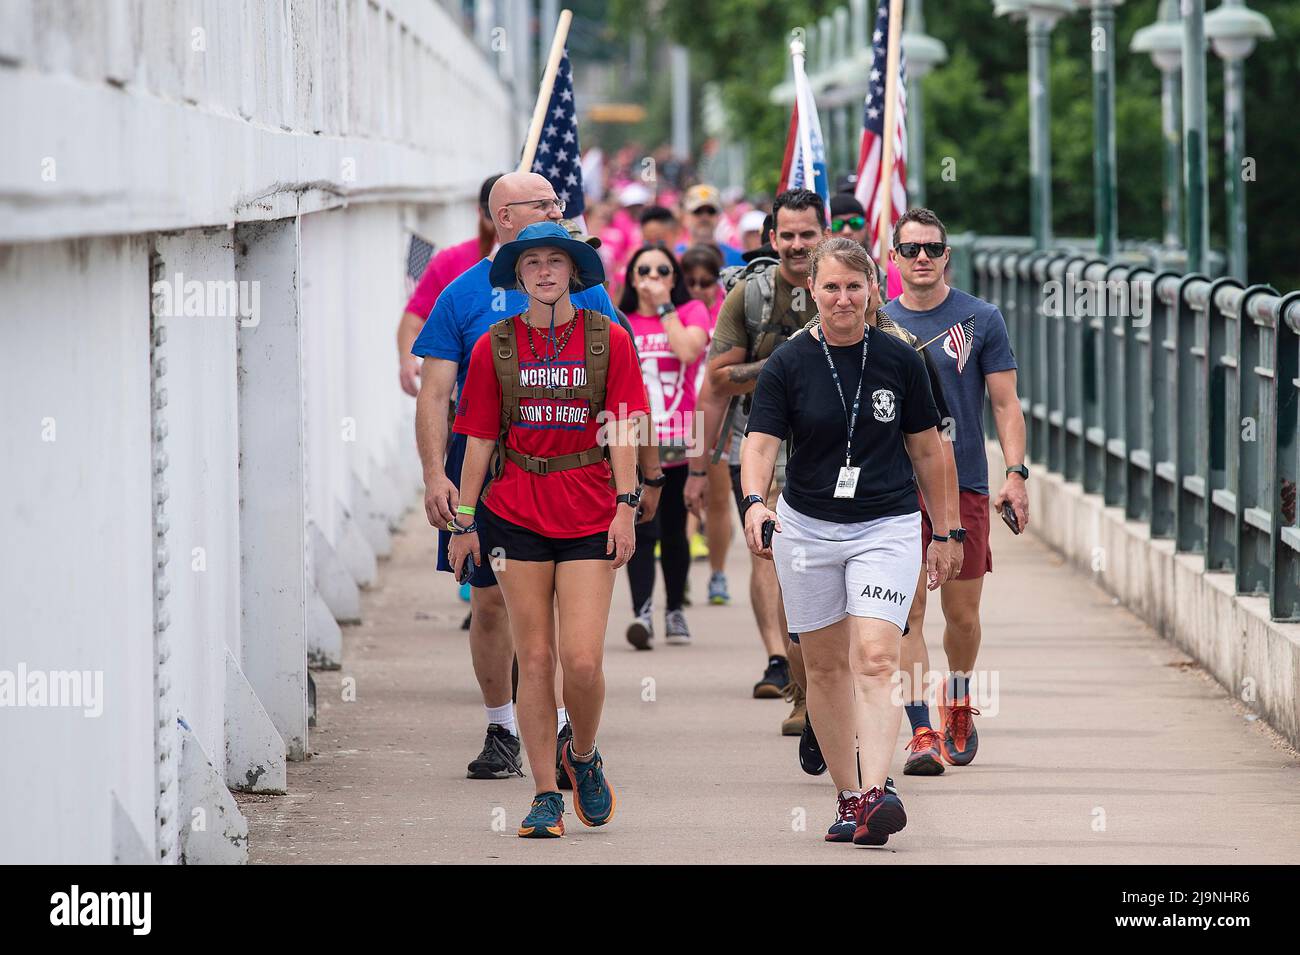 Republic Square Park. 24th May, 2022. Jessica kessel (Left) leading Carry The Load West Coast Route of the 2022 National Relay crossing Lady Bird Lake to Rally and honor the sacrifices of our nationÕs heroes at Republic Square Park. Austin, Texas. Mario Cantu/CSM/Alamy Live News Stock Photo